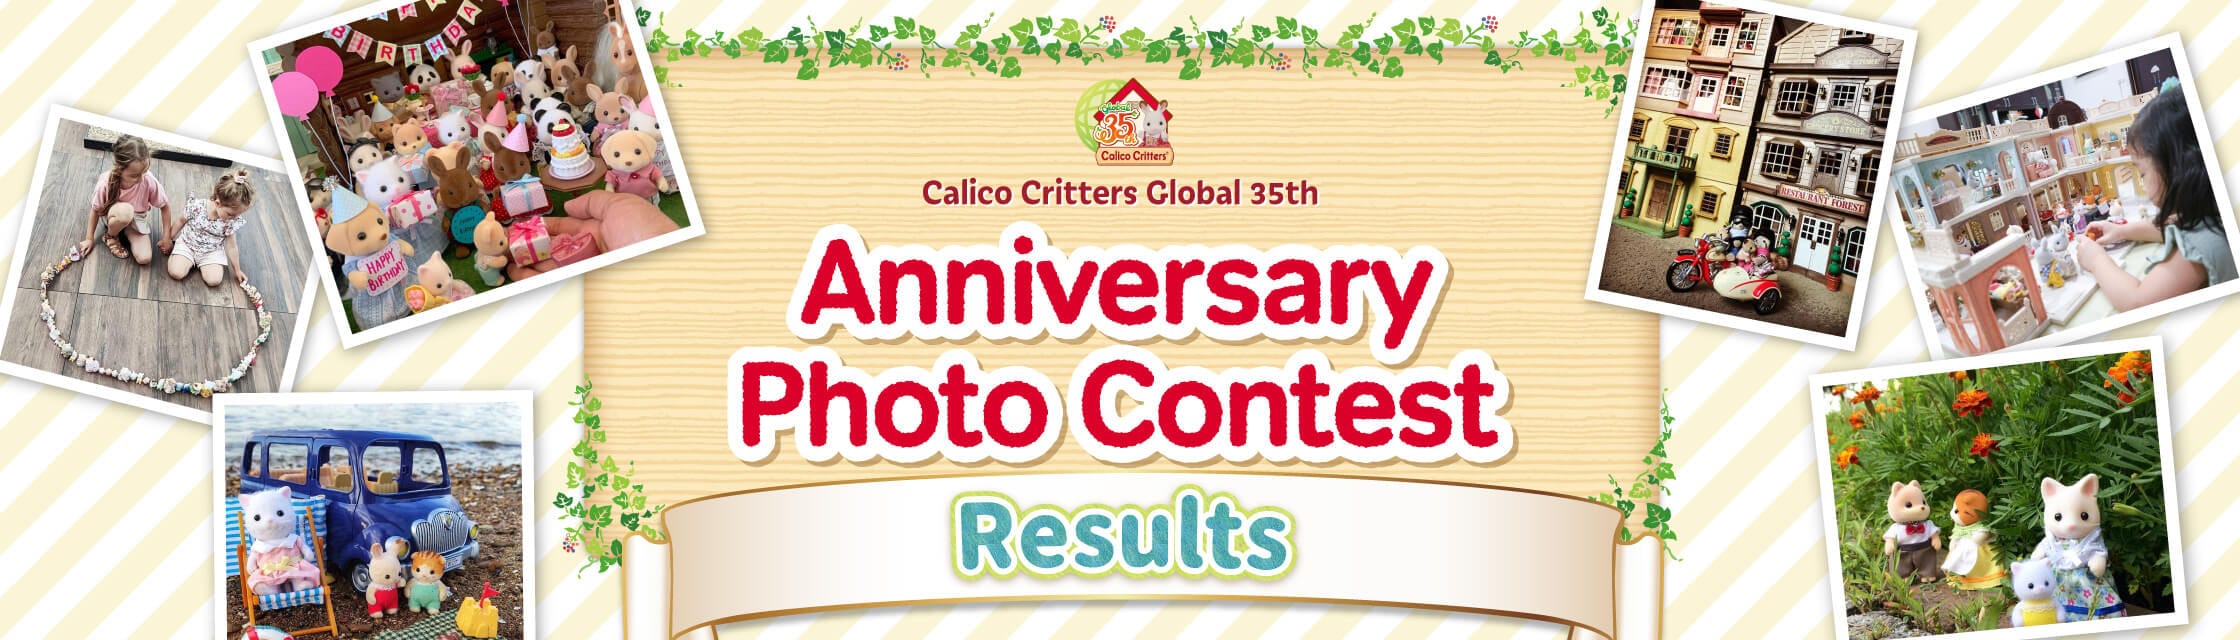 Calico Critters Global 35th Anniversary Photo Contest